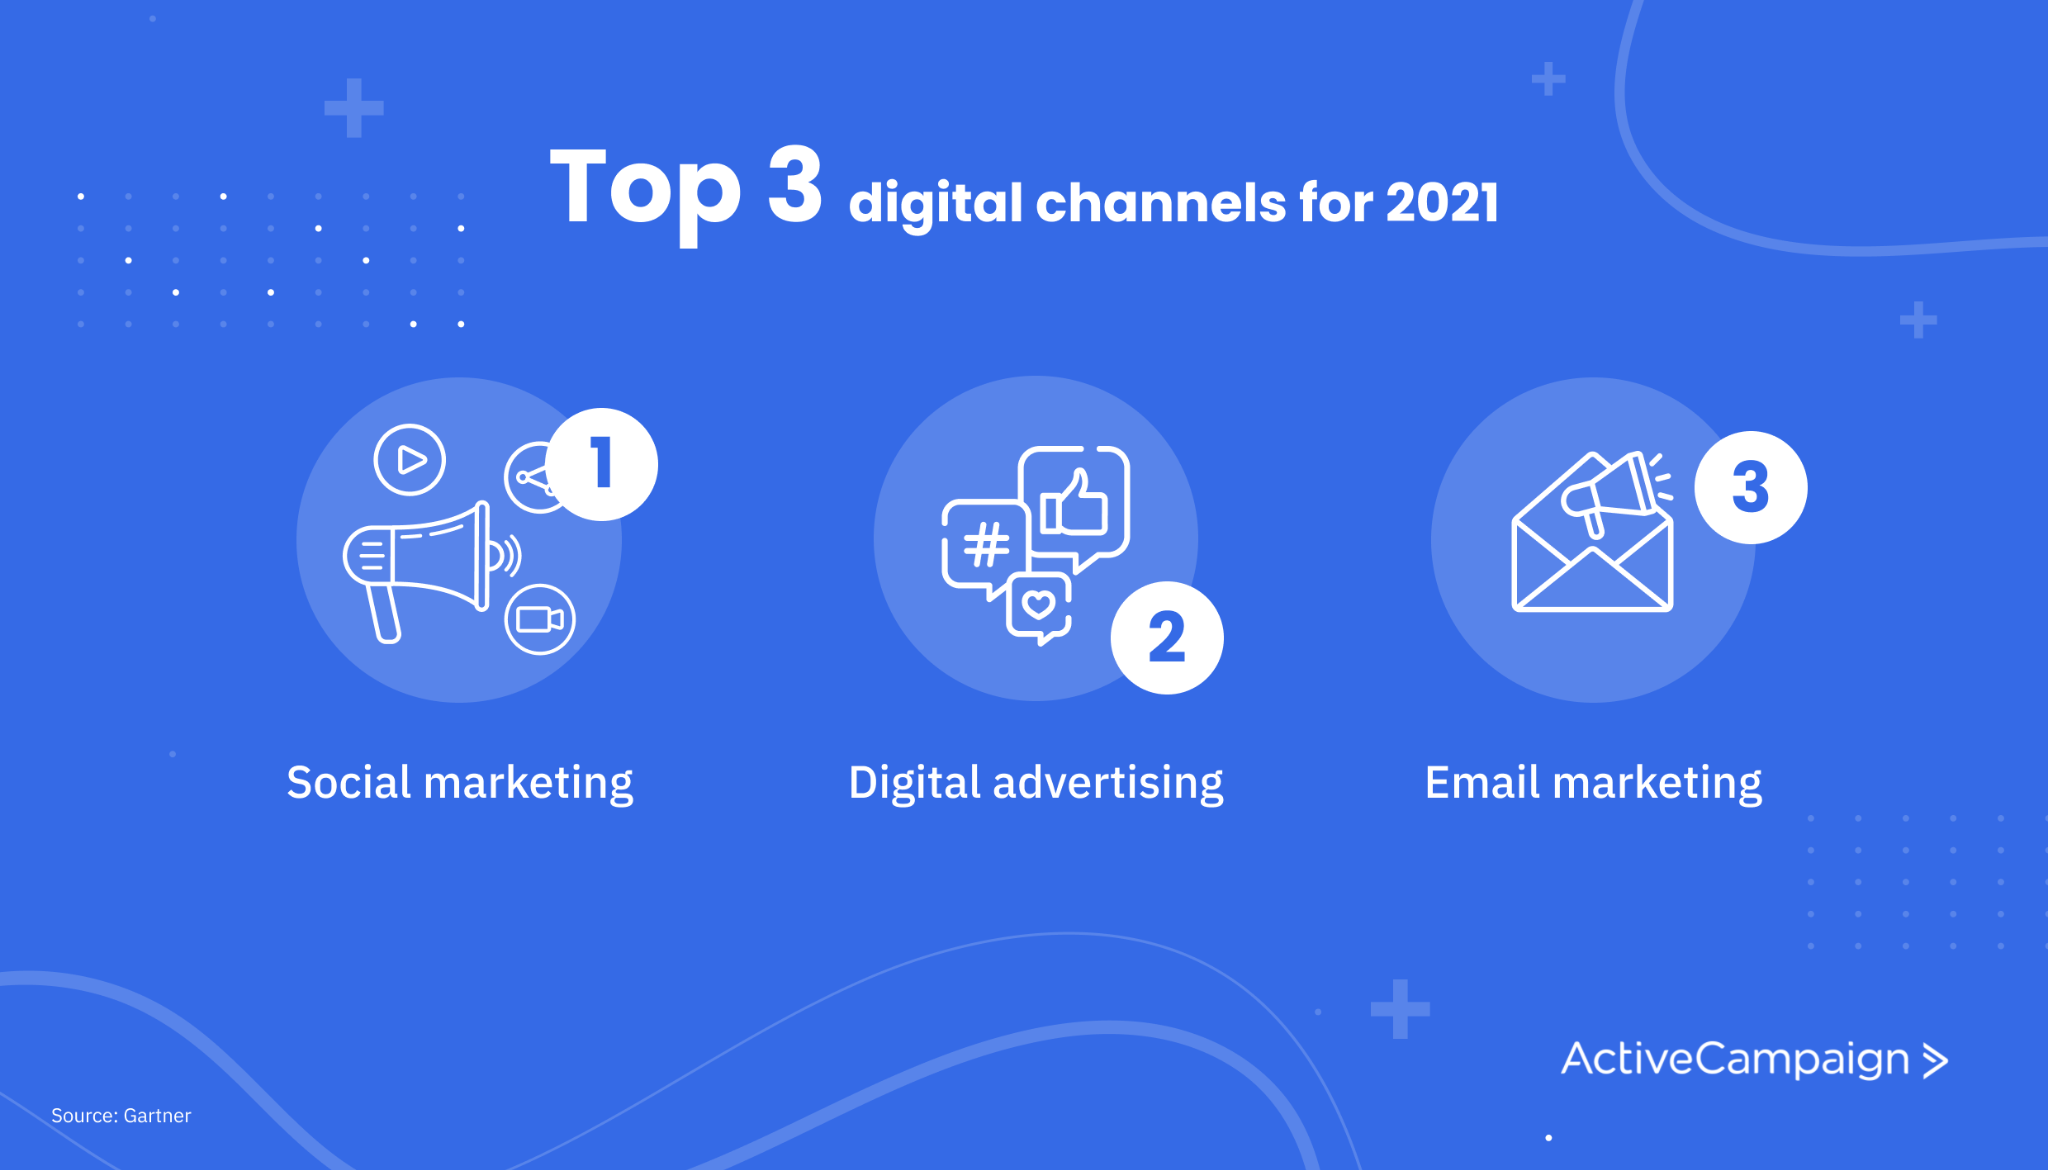 top three digital channels for 2021 include social marketing, digital advertising, and email marketing